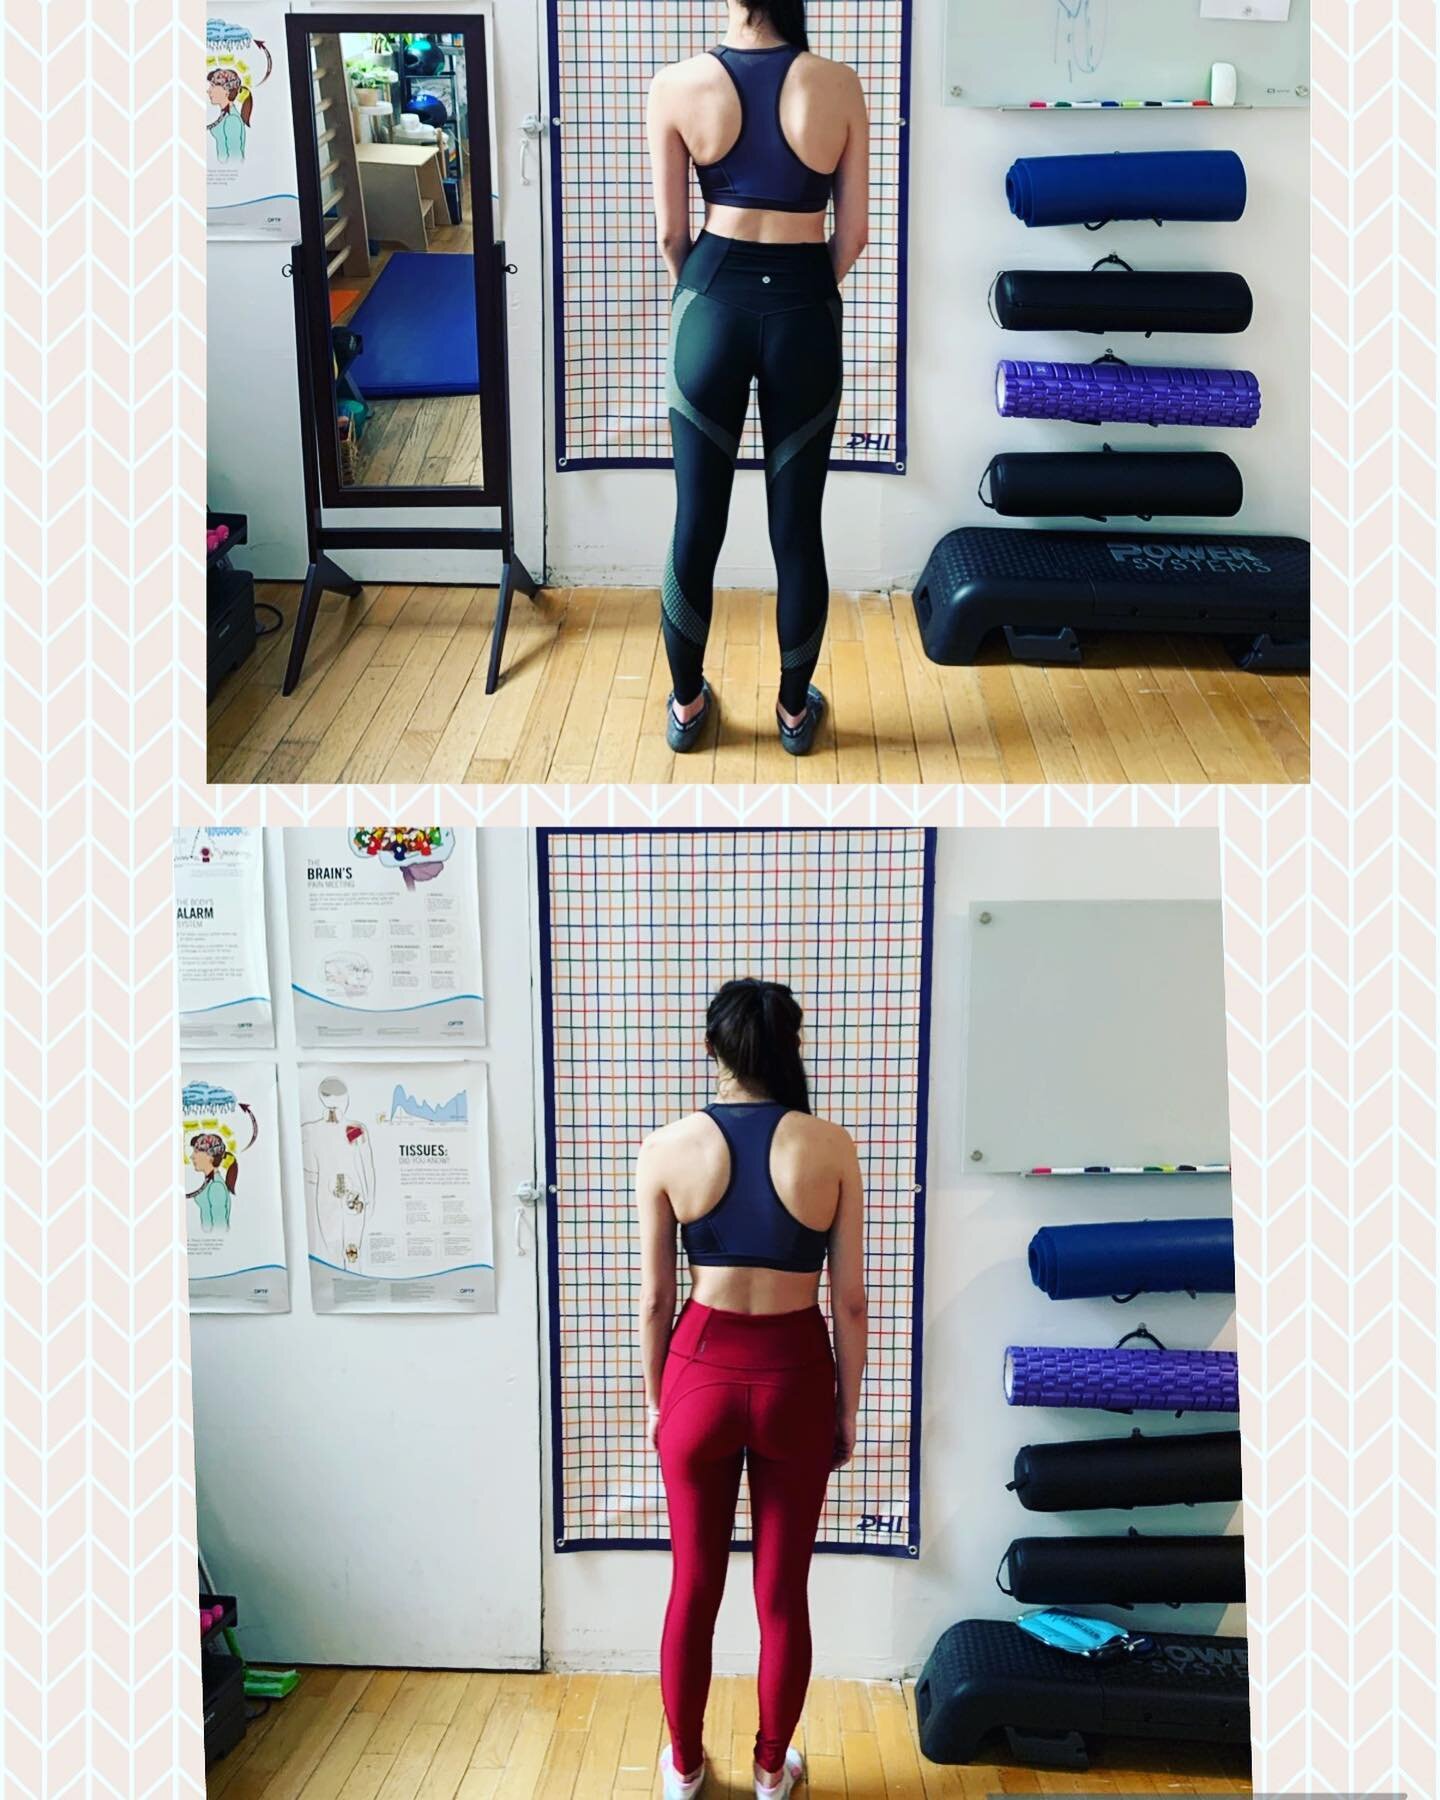 What a great improvement in standing posture in just two weeks of the Schroth program for scoliosis
#schrothmethod #scoliosis #physicaltherapy #rehabilitation #physio #scoliosisexercise #scoliosisstory #physio #posture #lowerbackpain #schroththerapis